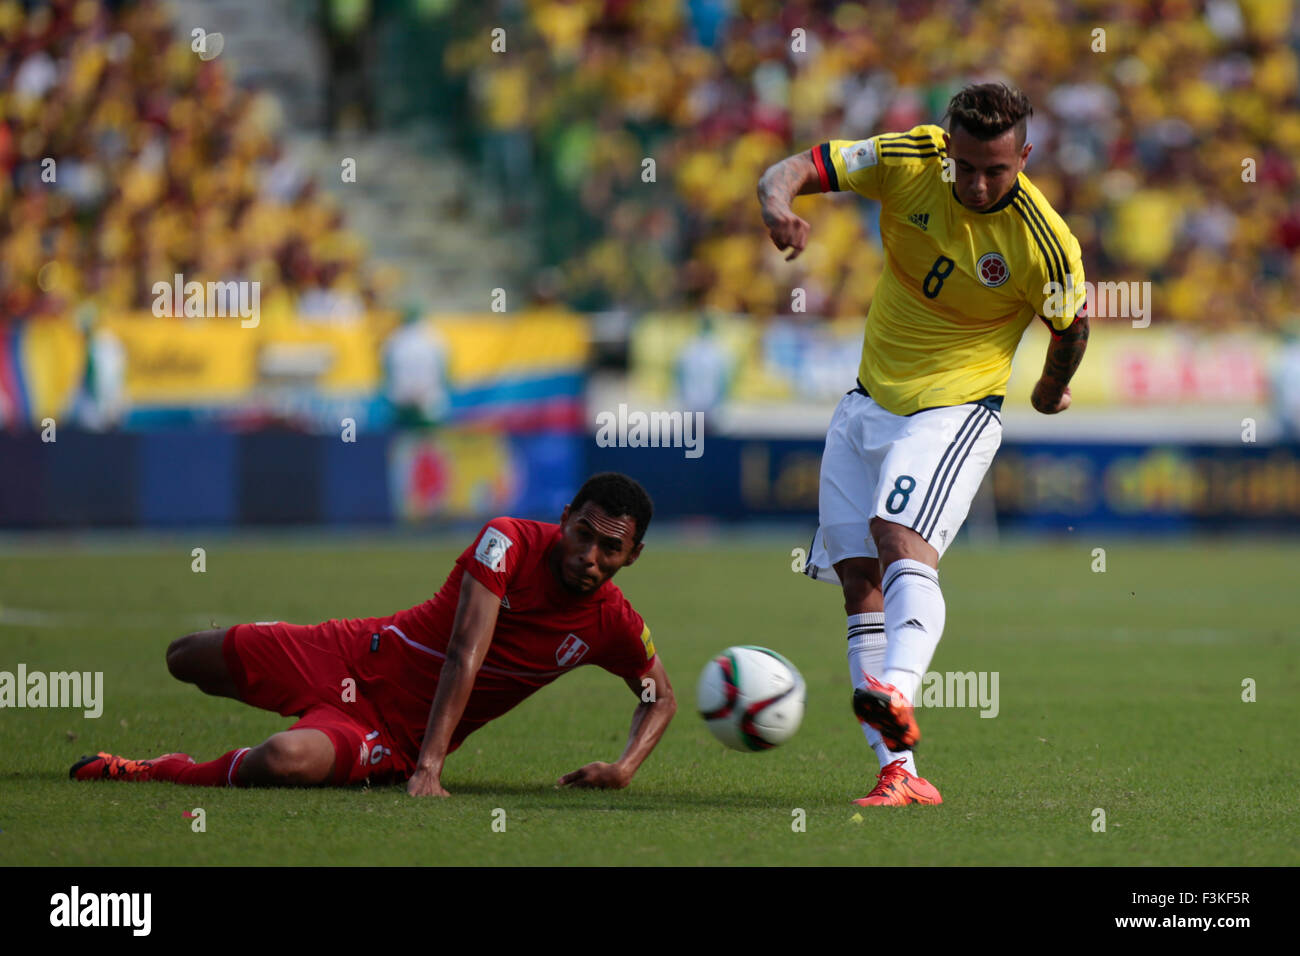 Barranquilla, Colombia. 8th Oct, 2015. Colombia's Edwin Cardona (R) vies with Carlos Lobaton of Peru, during the qualifying match for World Cup Russia 2018 held at Metropolitan Stadium Roberto Melendez, in Barranquilla, Colombia, on Oct. 8, 2015. Colombia won 2-0. Credit:  Juan Paez/COLPRENSA/Xinhua/Alamy Live News Stock Photo